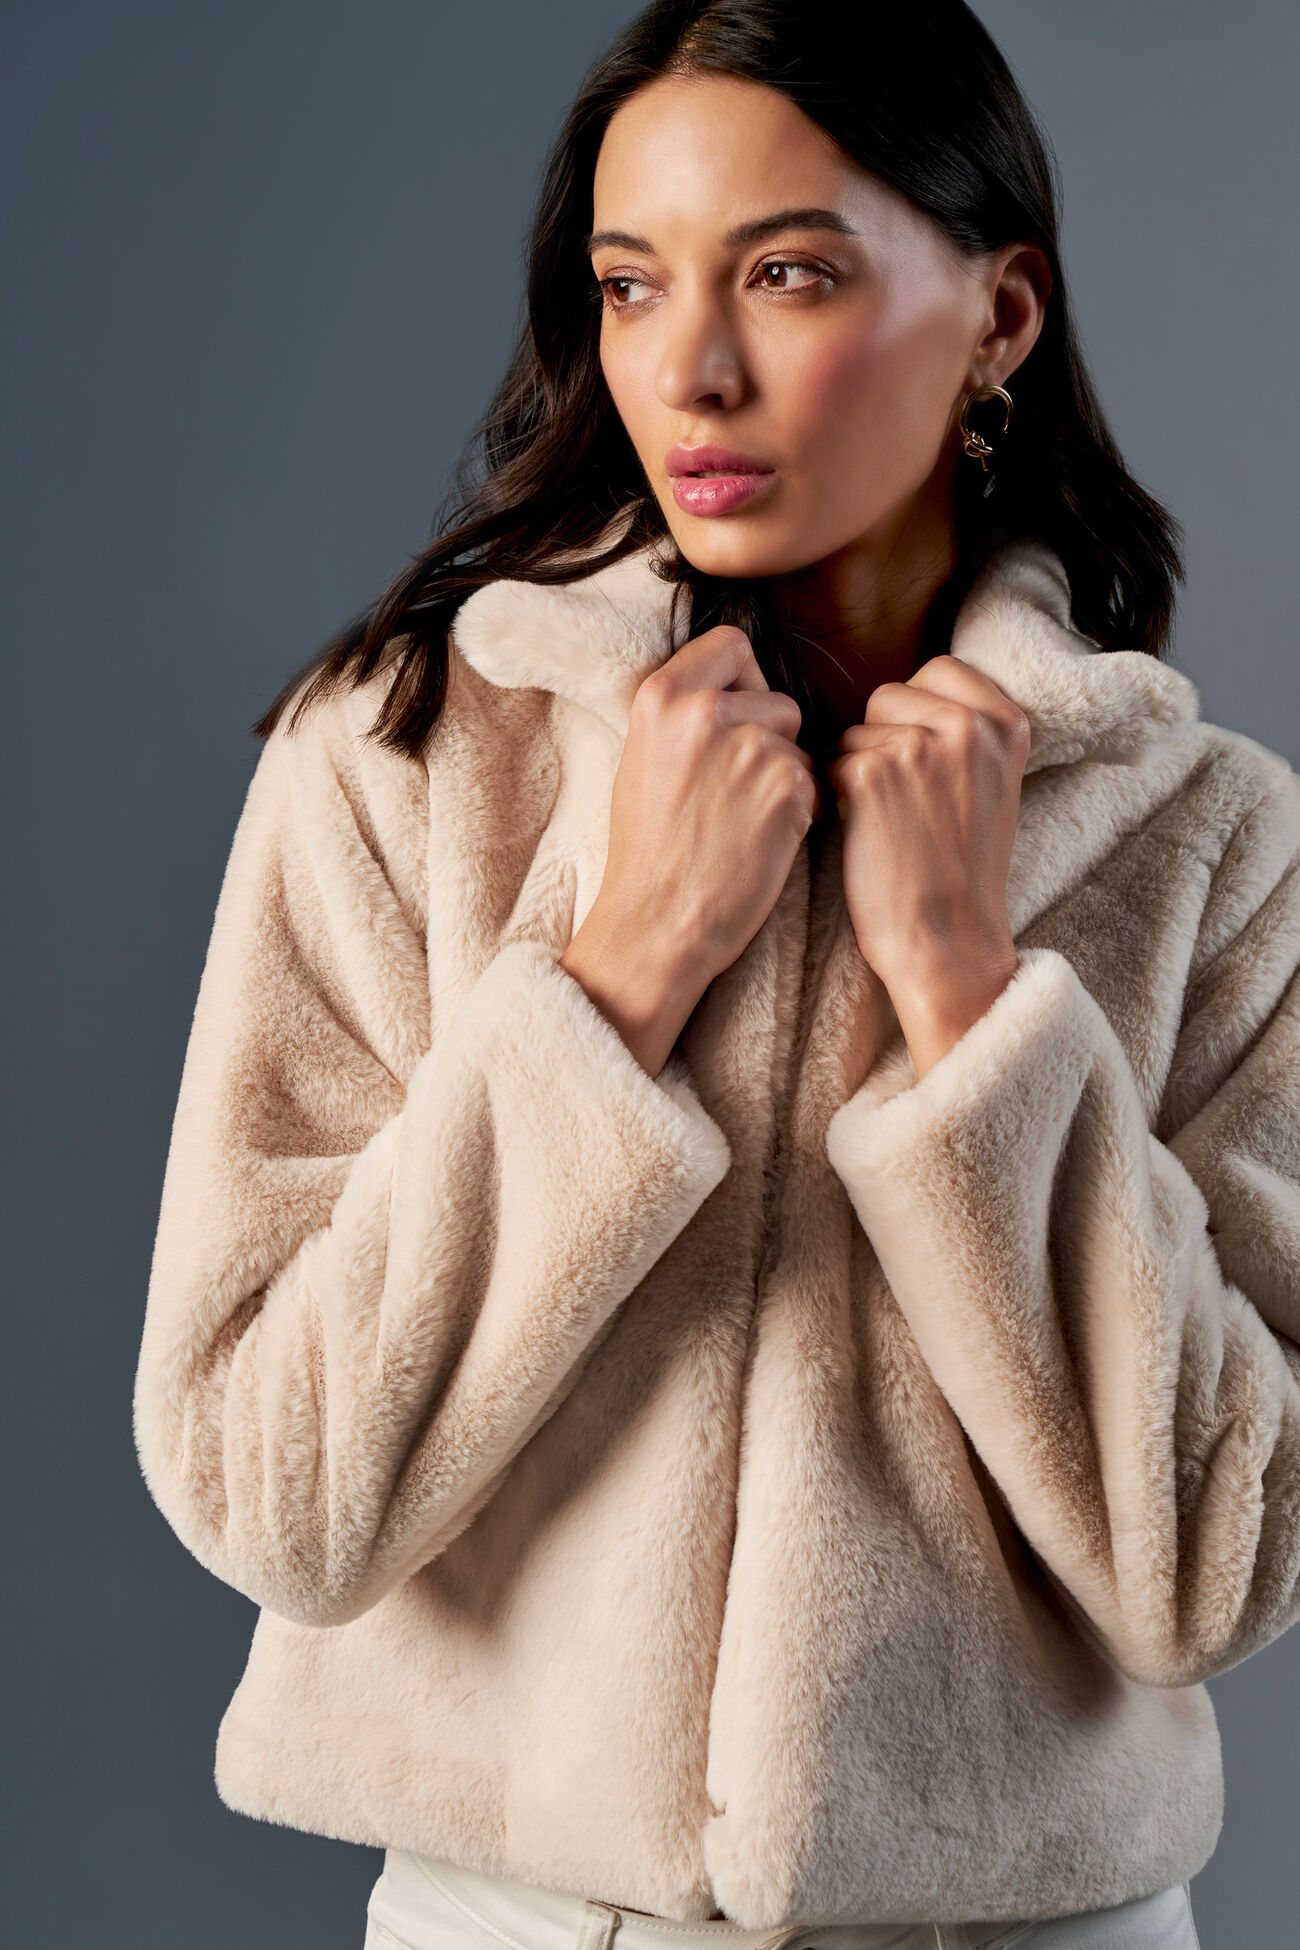 Buy Hooded Cropped Faux Fur Jacket Women's Fashion Wedding Party Online in  India 